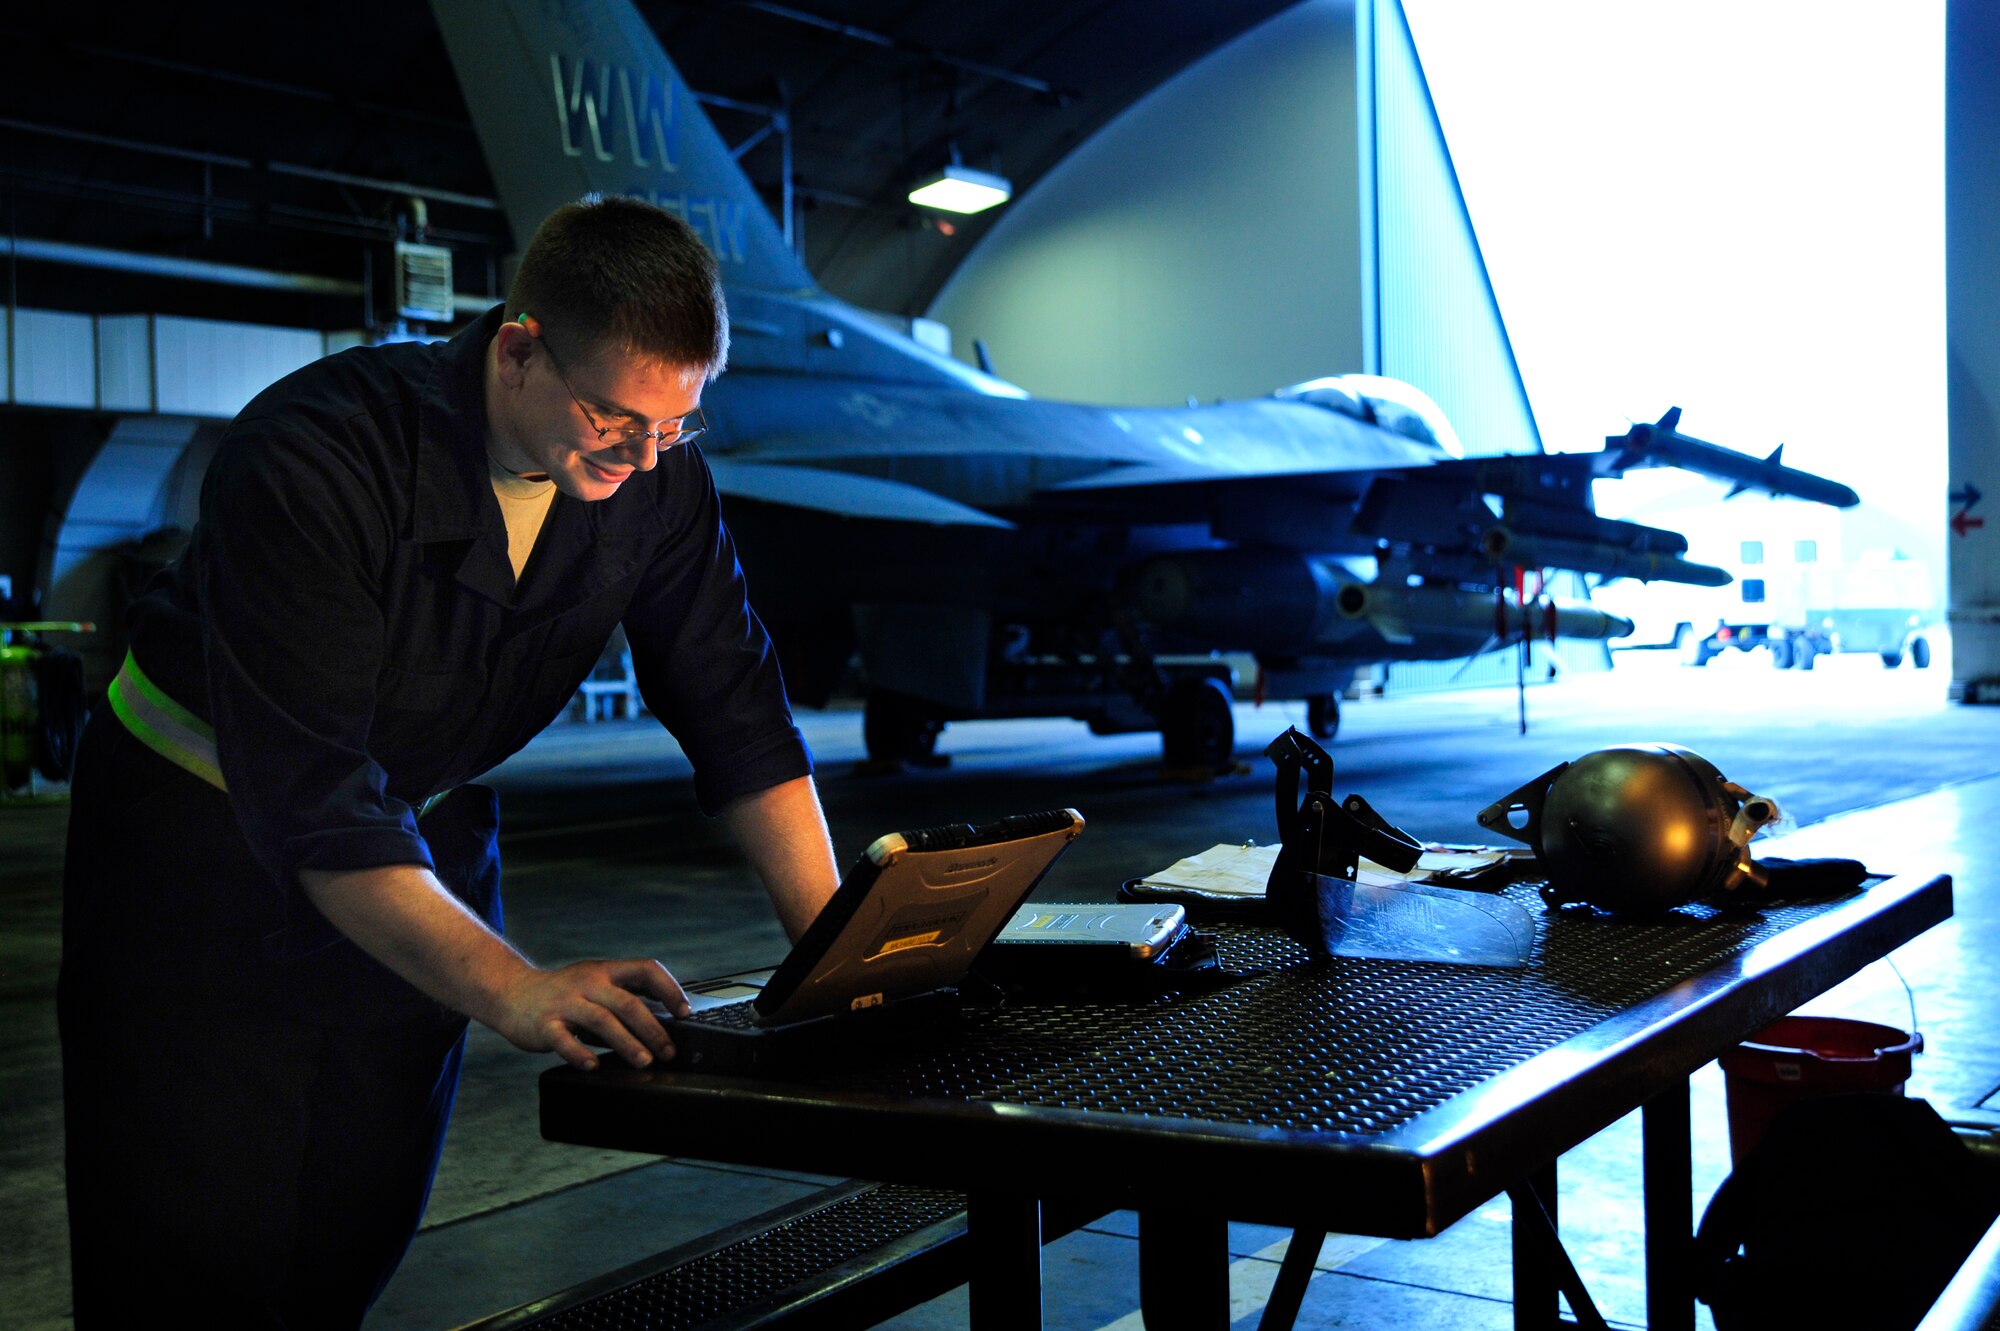 MISAWA AIR BASE, Japan - U.S. Air Force Senior Airman Christopher Kimmell, 14th Aircraft Maintenance Unit, checks his technical orders while working on a F-16 Fighting Falcon during an operational readiness exercise here Nov. 5. The 35th Fighter Wing is currently going through an ORE in preparation for an operational readiness inspection in December. (U.S. Air Force photo/Staff Sgt. Nathan Lipscomb)      